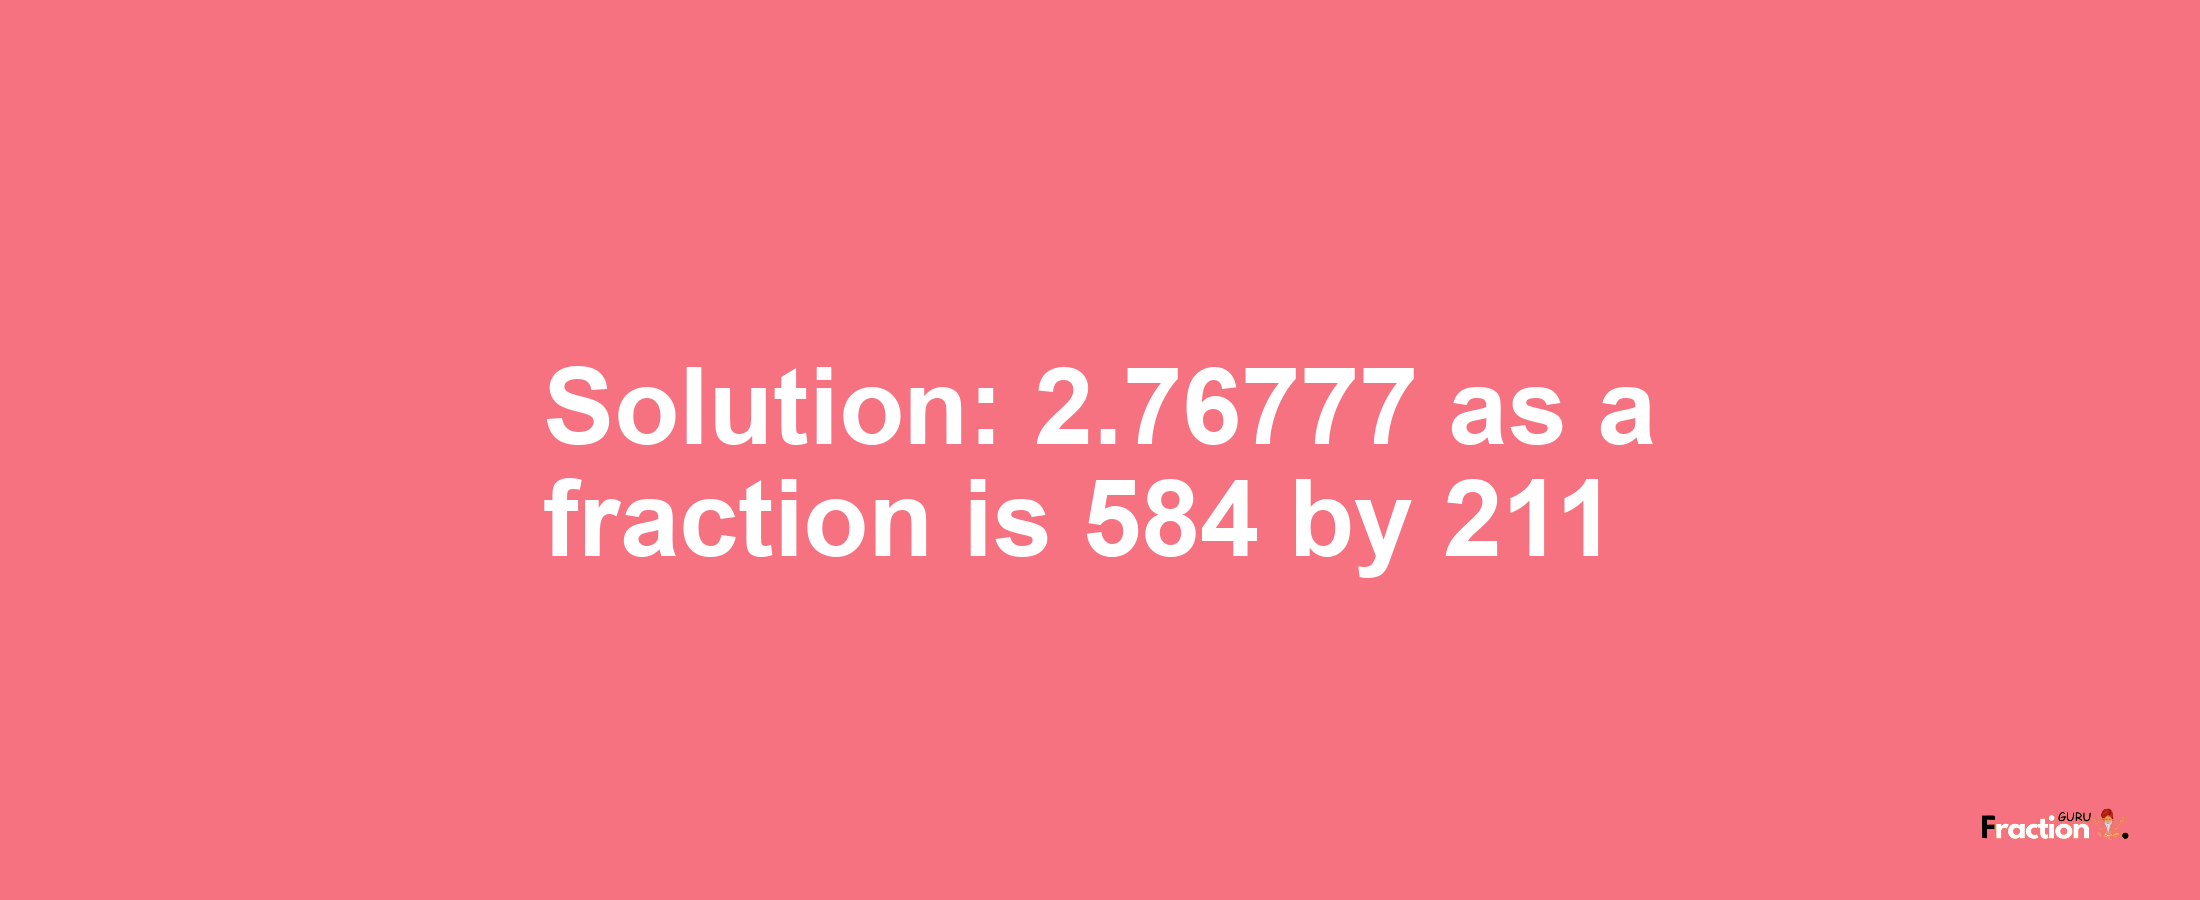 Solution:2.76777 as a fraction is 584/211